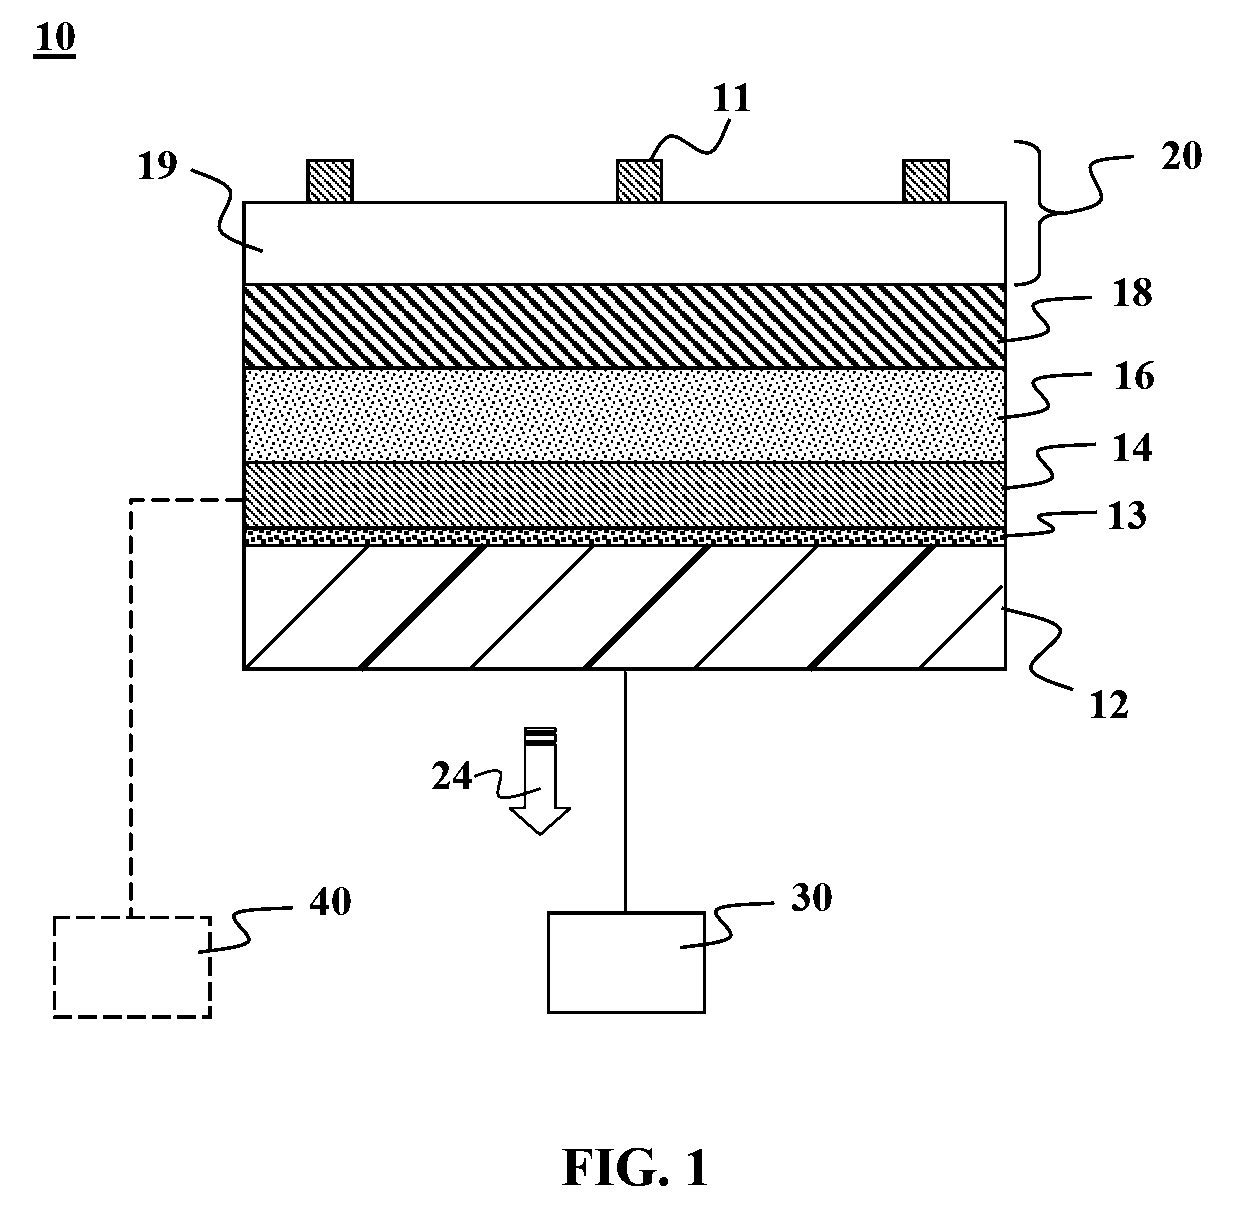 Thermal management for photovoltaic devices